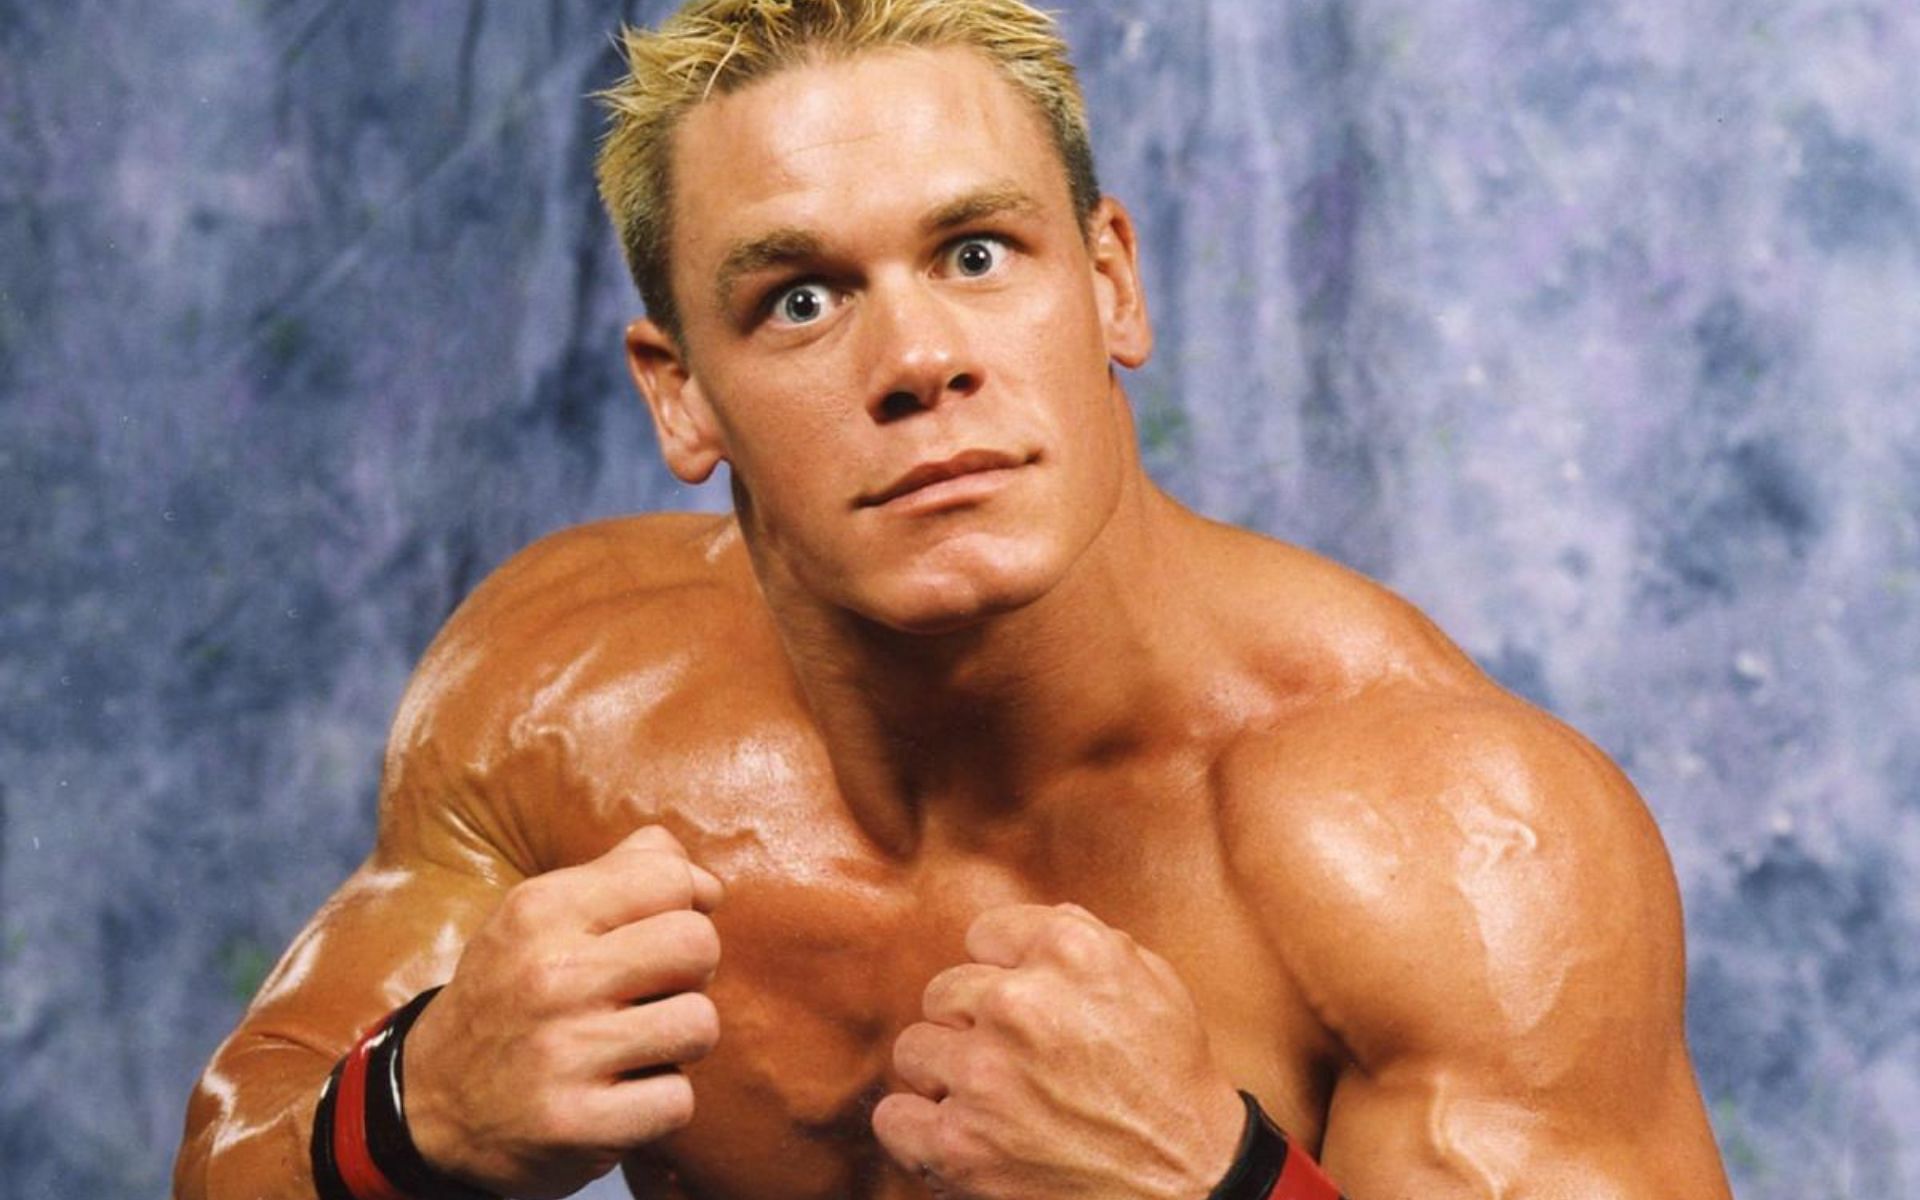 A young John Cena made his WWE debut in 2002!